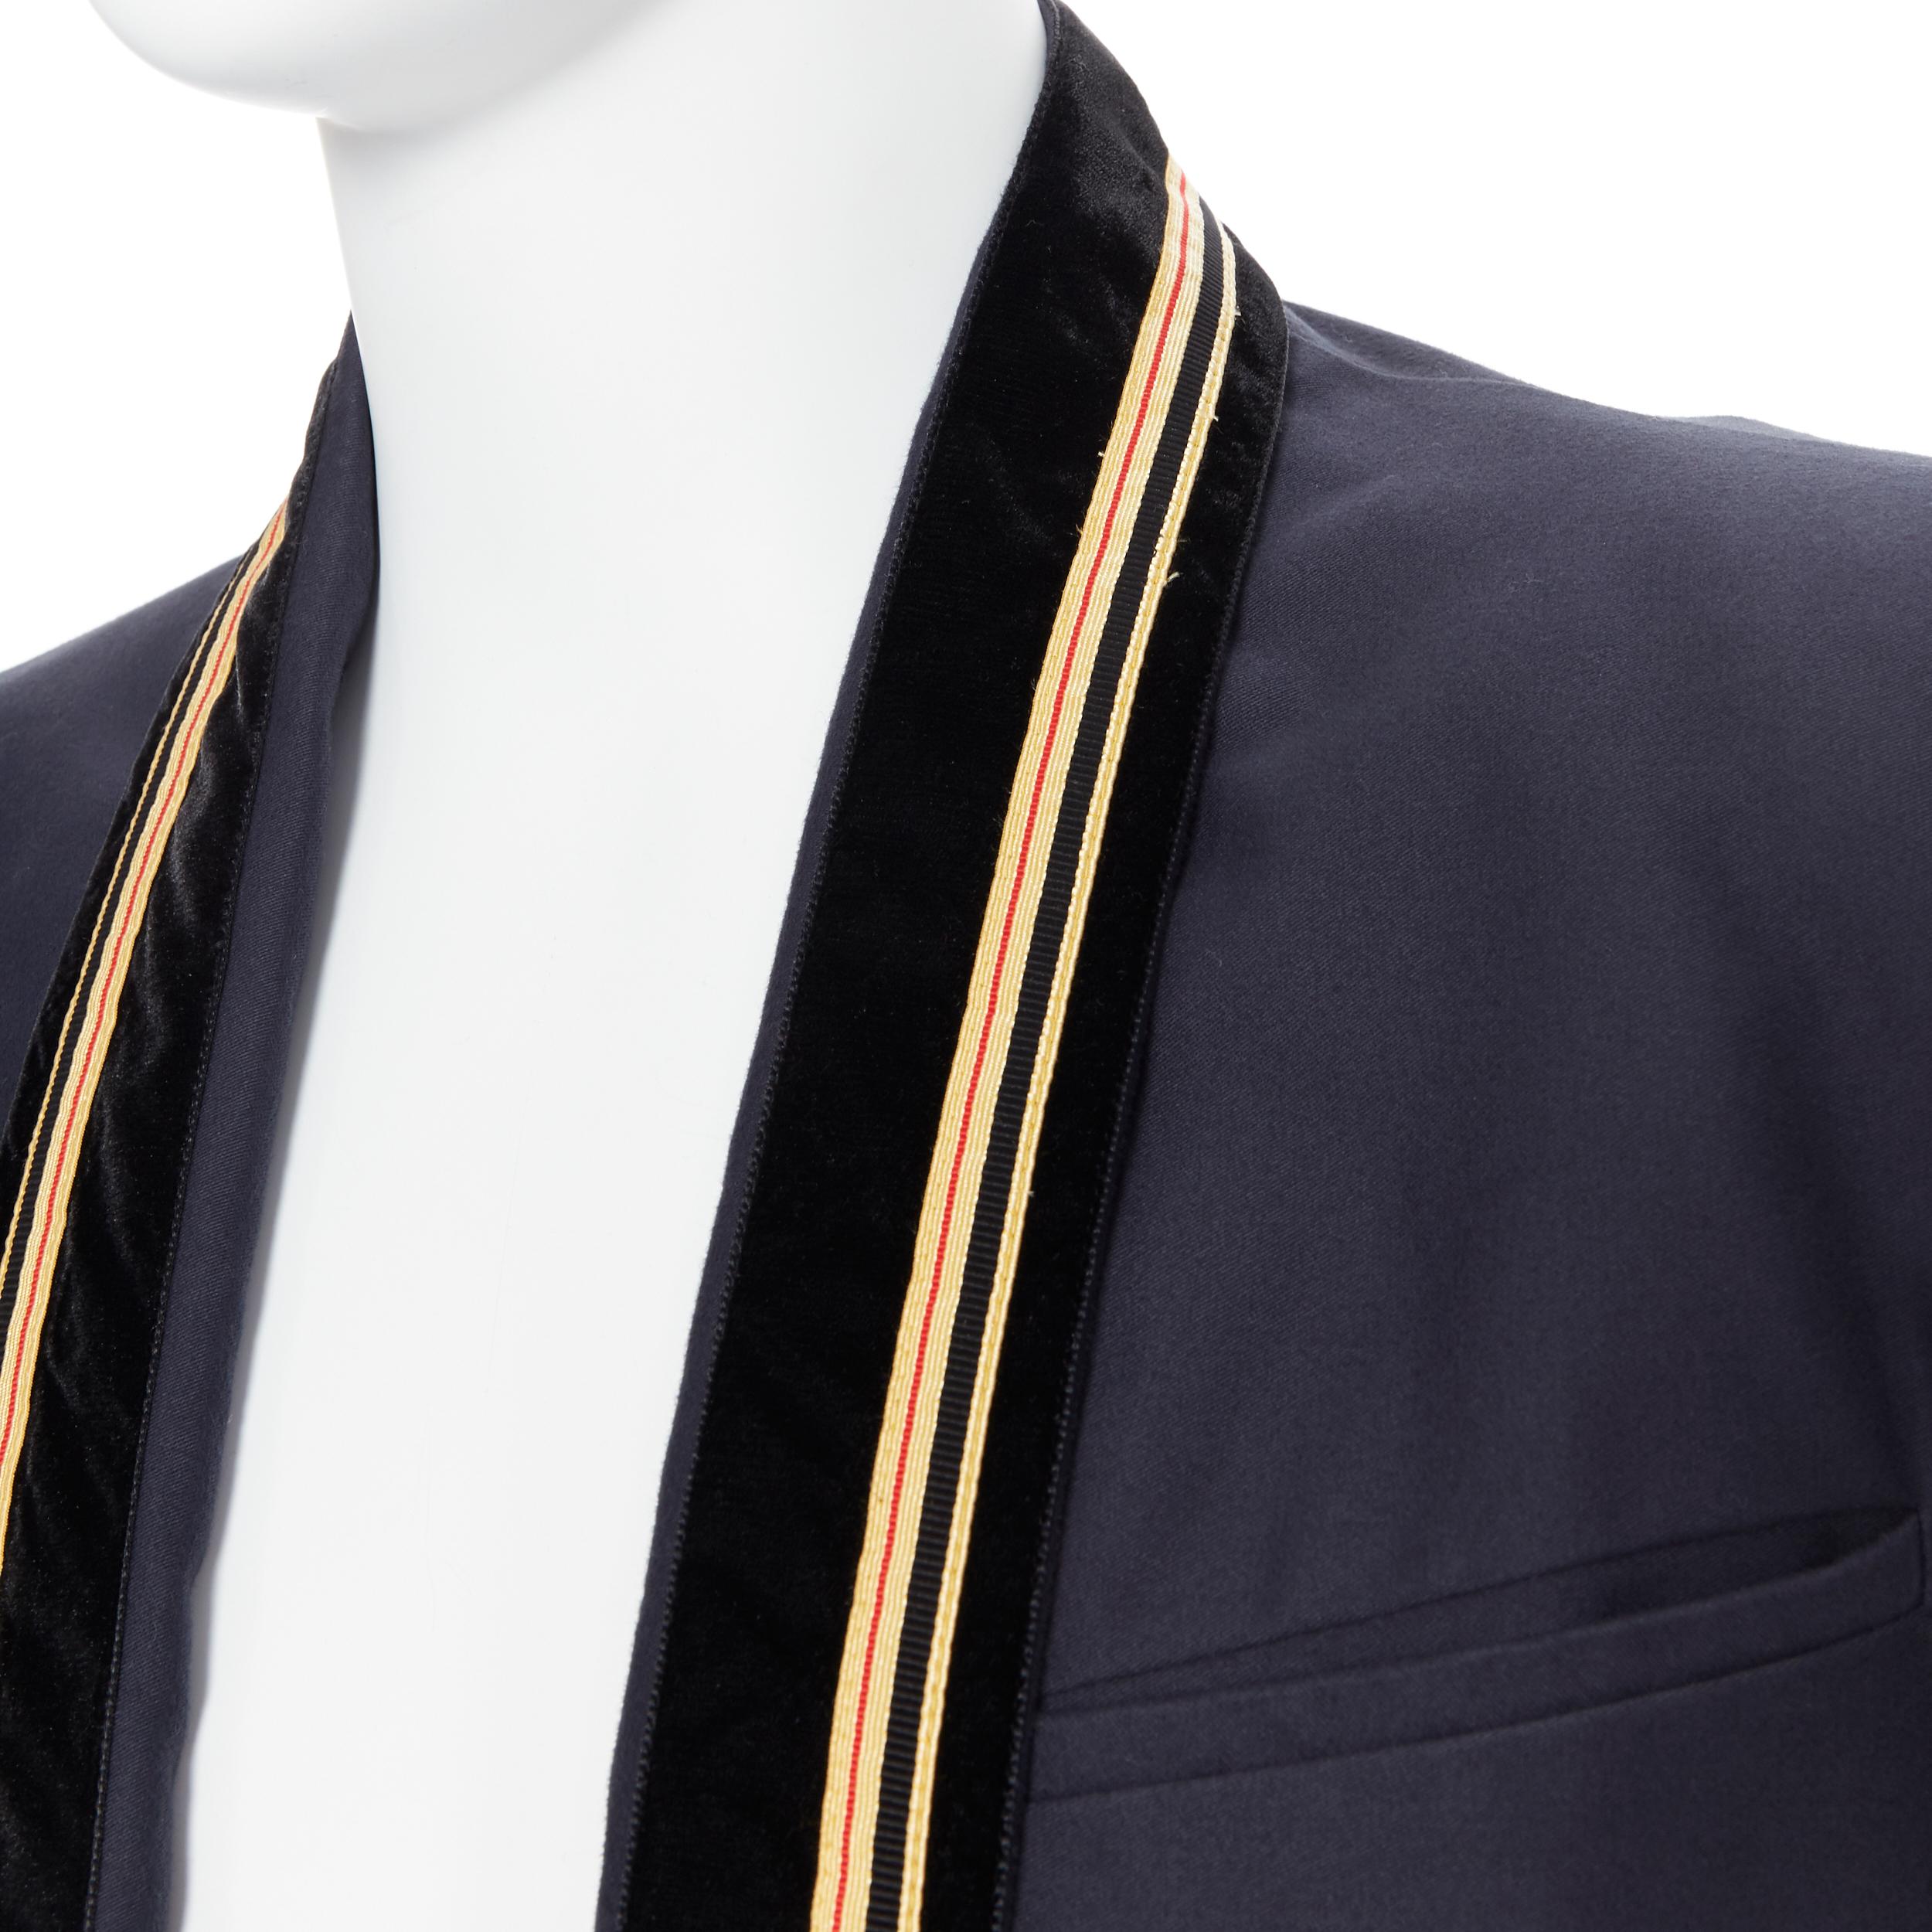 new BALMAIN navy cotton velvet military shawl collar double breasted jacket EU52
Brand: Balmain
Designer: Olivier Rousteing
Model Name / Style: Military blazer
Material: Cotton
Color: Navy
Pattern: Solid
Closure: Button
Extra Detail: BALMAIN style